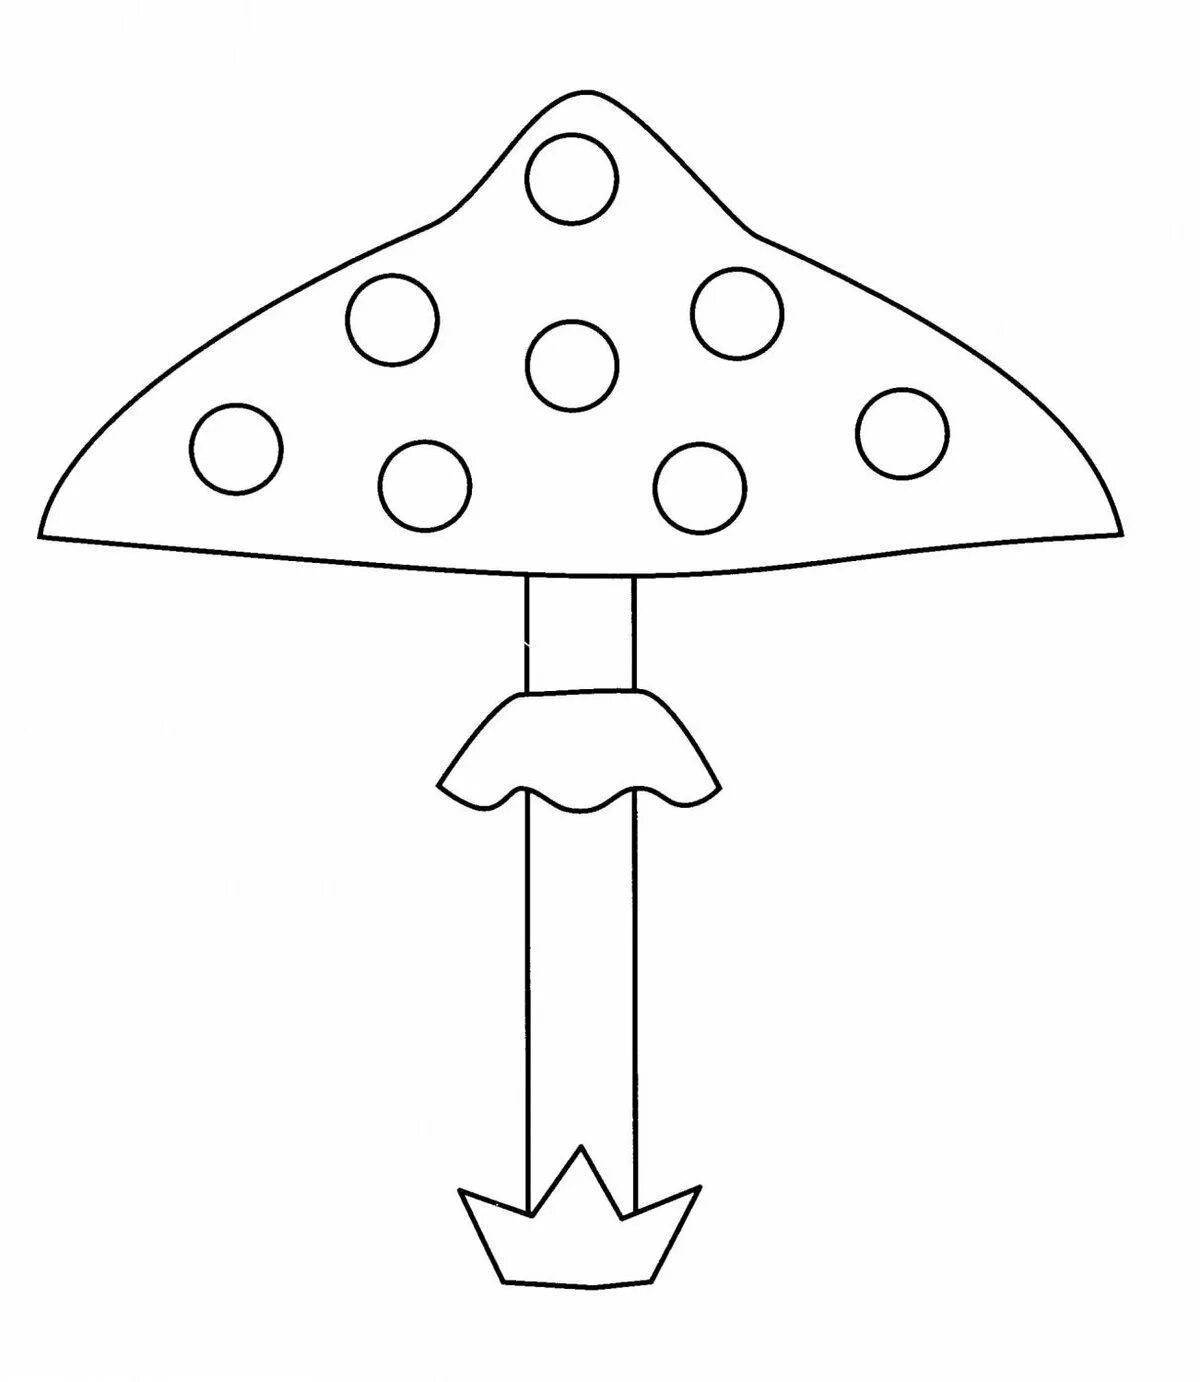 Coloring book funny mushroom fly agaric